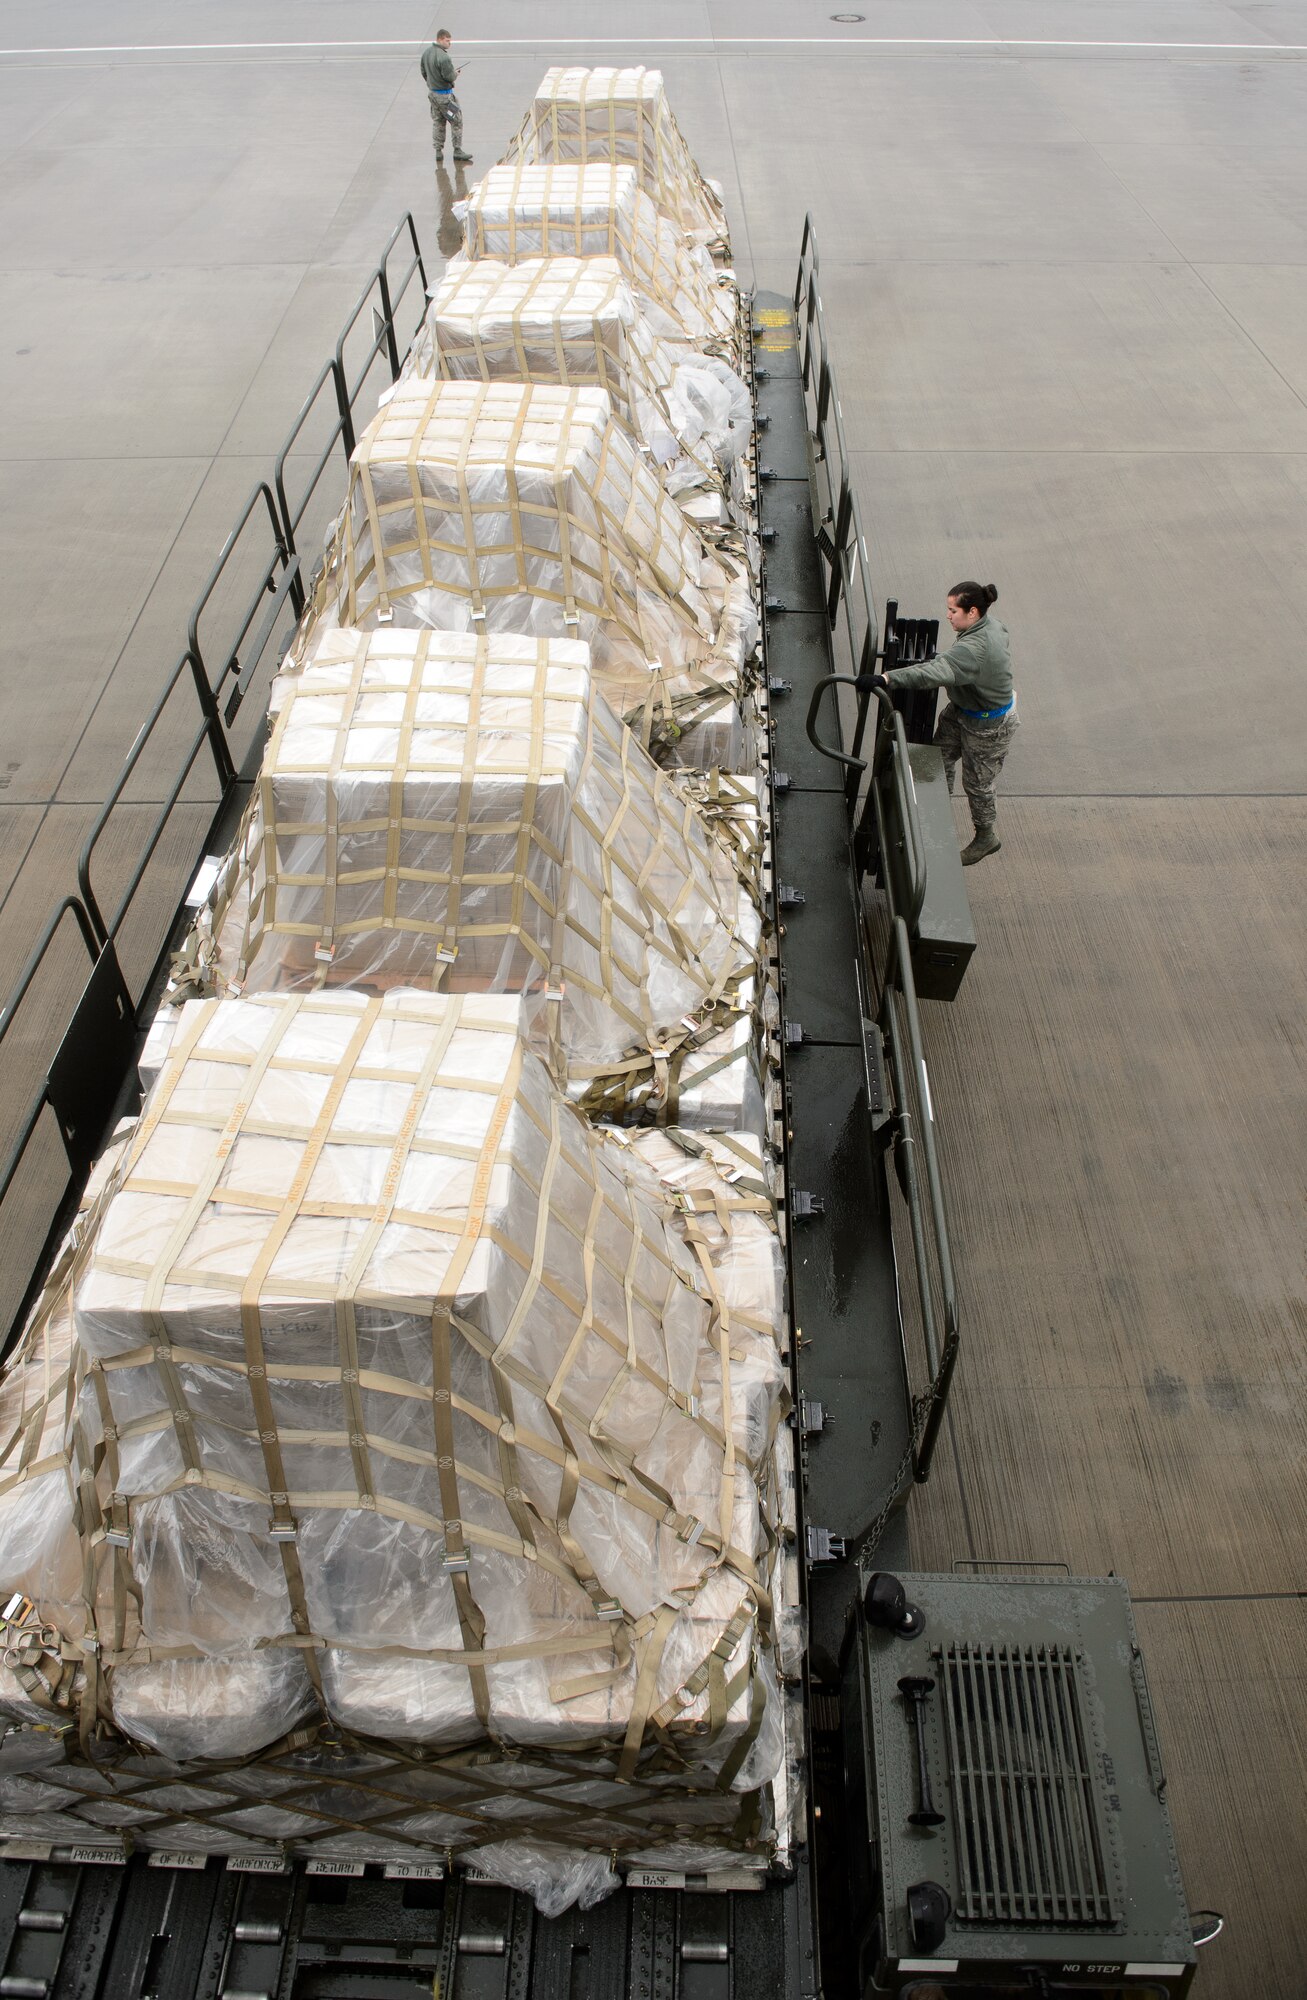 Airmen from the 721st Aerial Port Squadron move humanitarian cargo March 25, 2016, at Ramstein Air Base, Germany. A KC-10 Extender from the 76th Air Refueling Squadron brought the cargo to Germany as part of a training mission they were doing. Once at Ramstein, 721st APS Airmen will coordinate to get more than 285,000 meals to children in need. (U.S. Air Force photo/Staff Sgt. Armando A. Schwier-Morales)